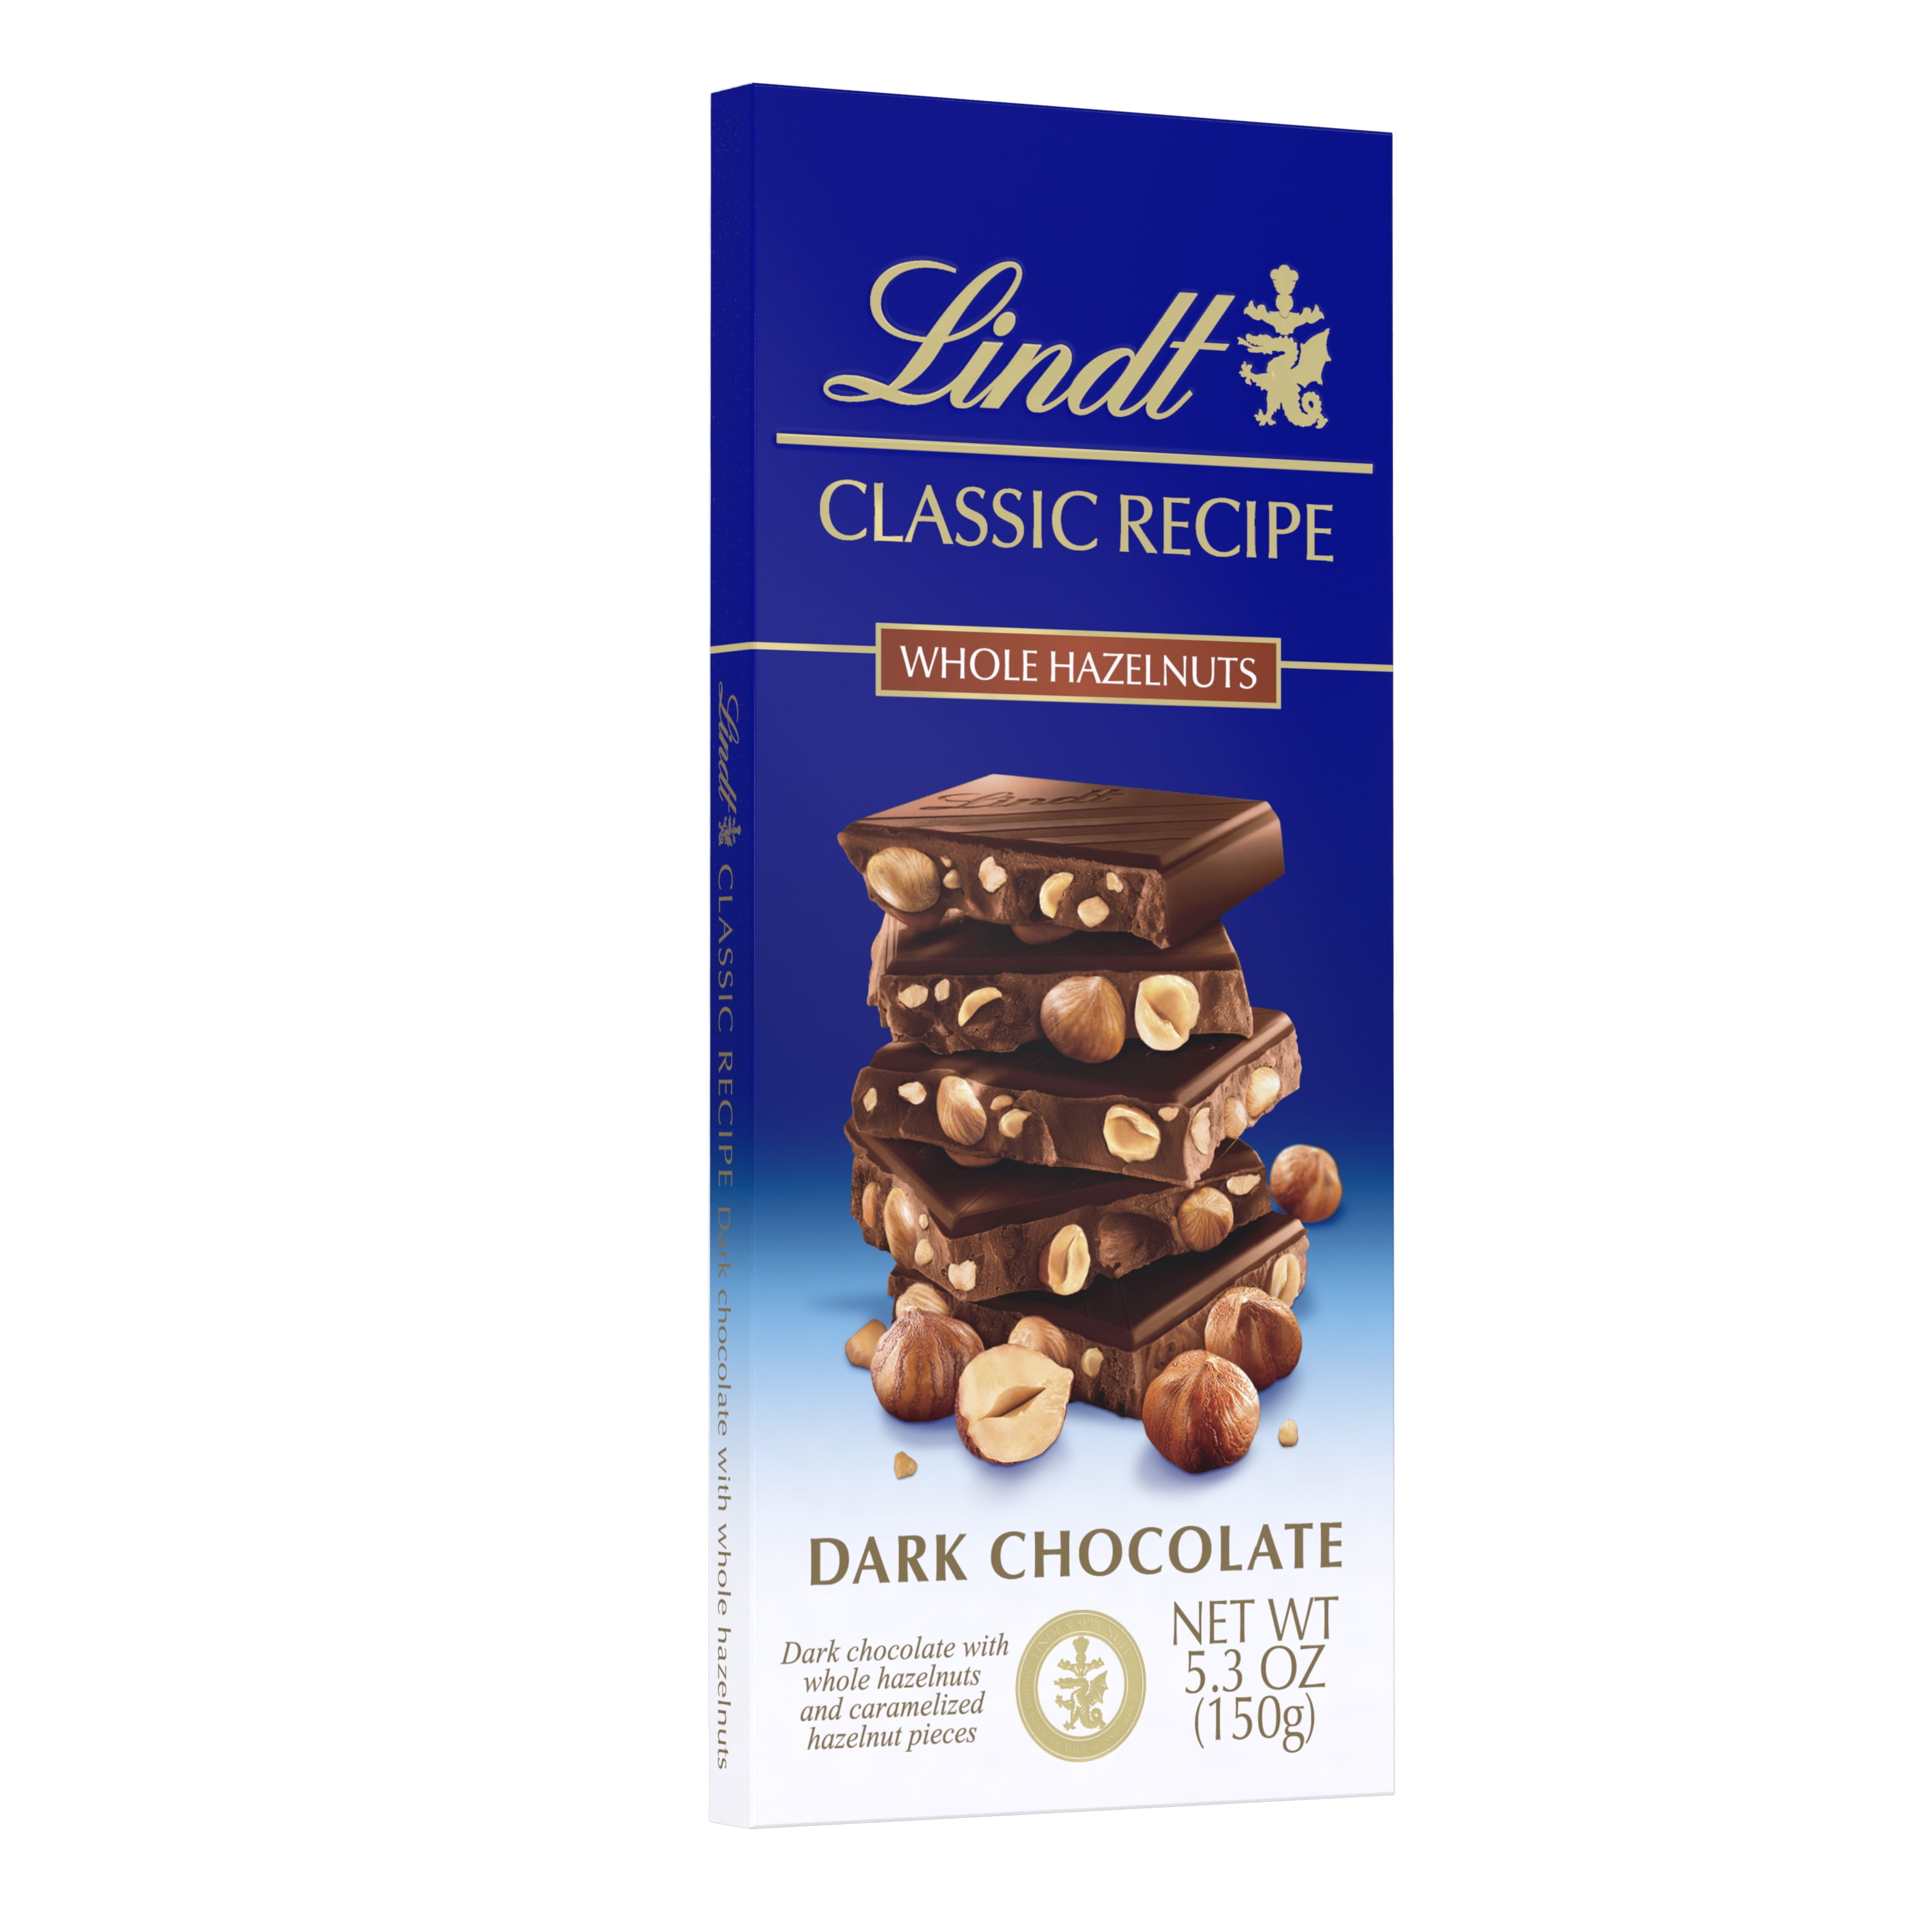 Lindt CLASSIC RECIPE Whole Hazelnut Dark Chocolate Bar, Chocolate Easter Candy for Easter Baskets, 5.3 oz.